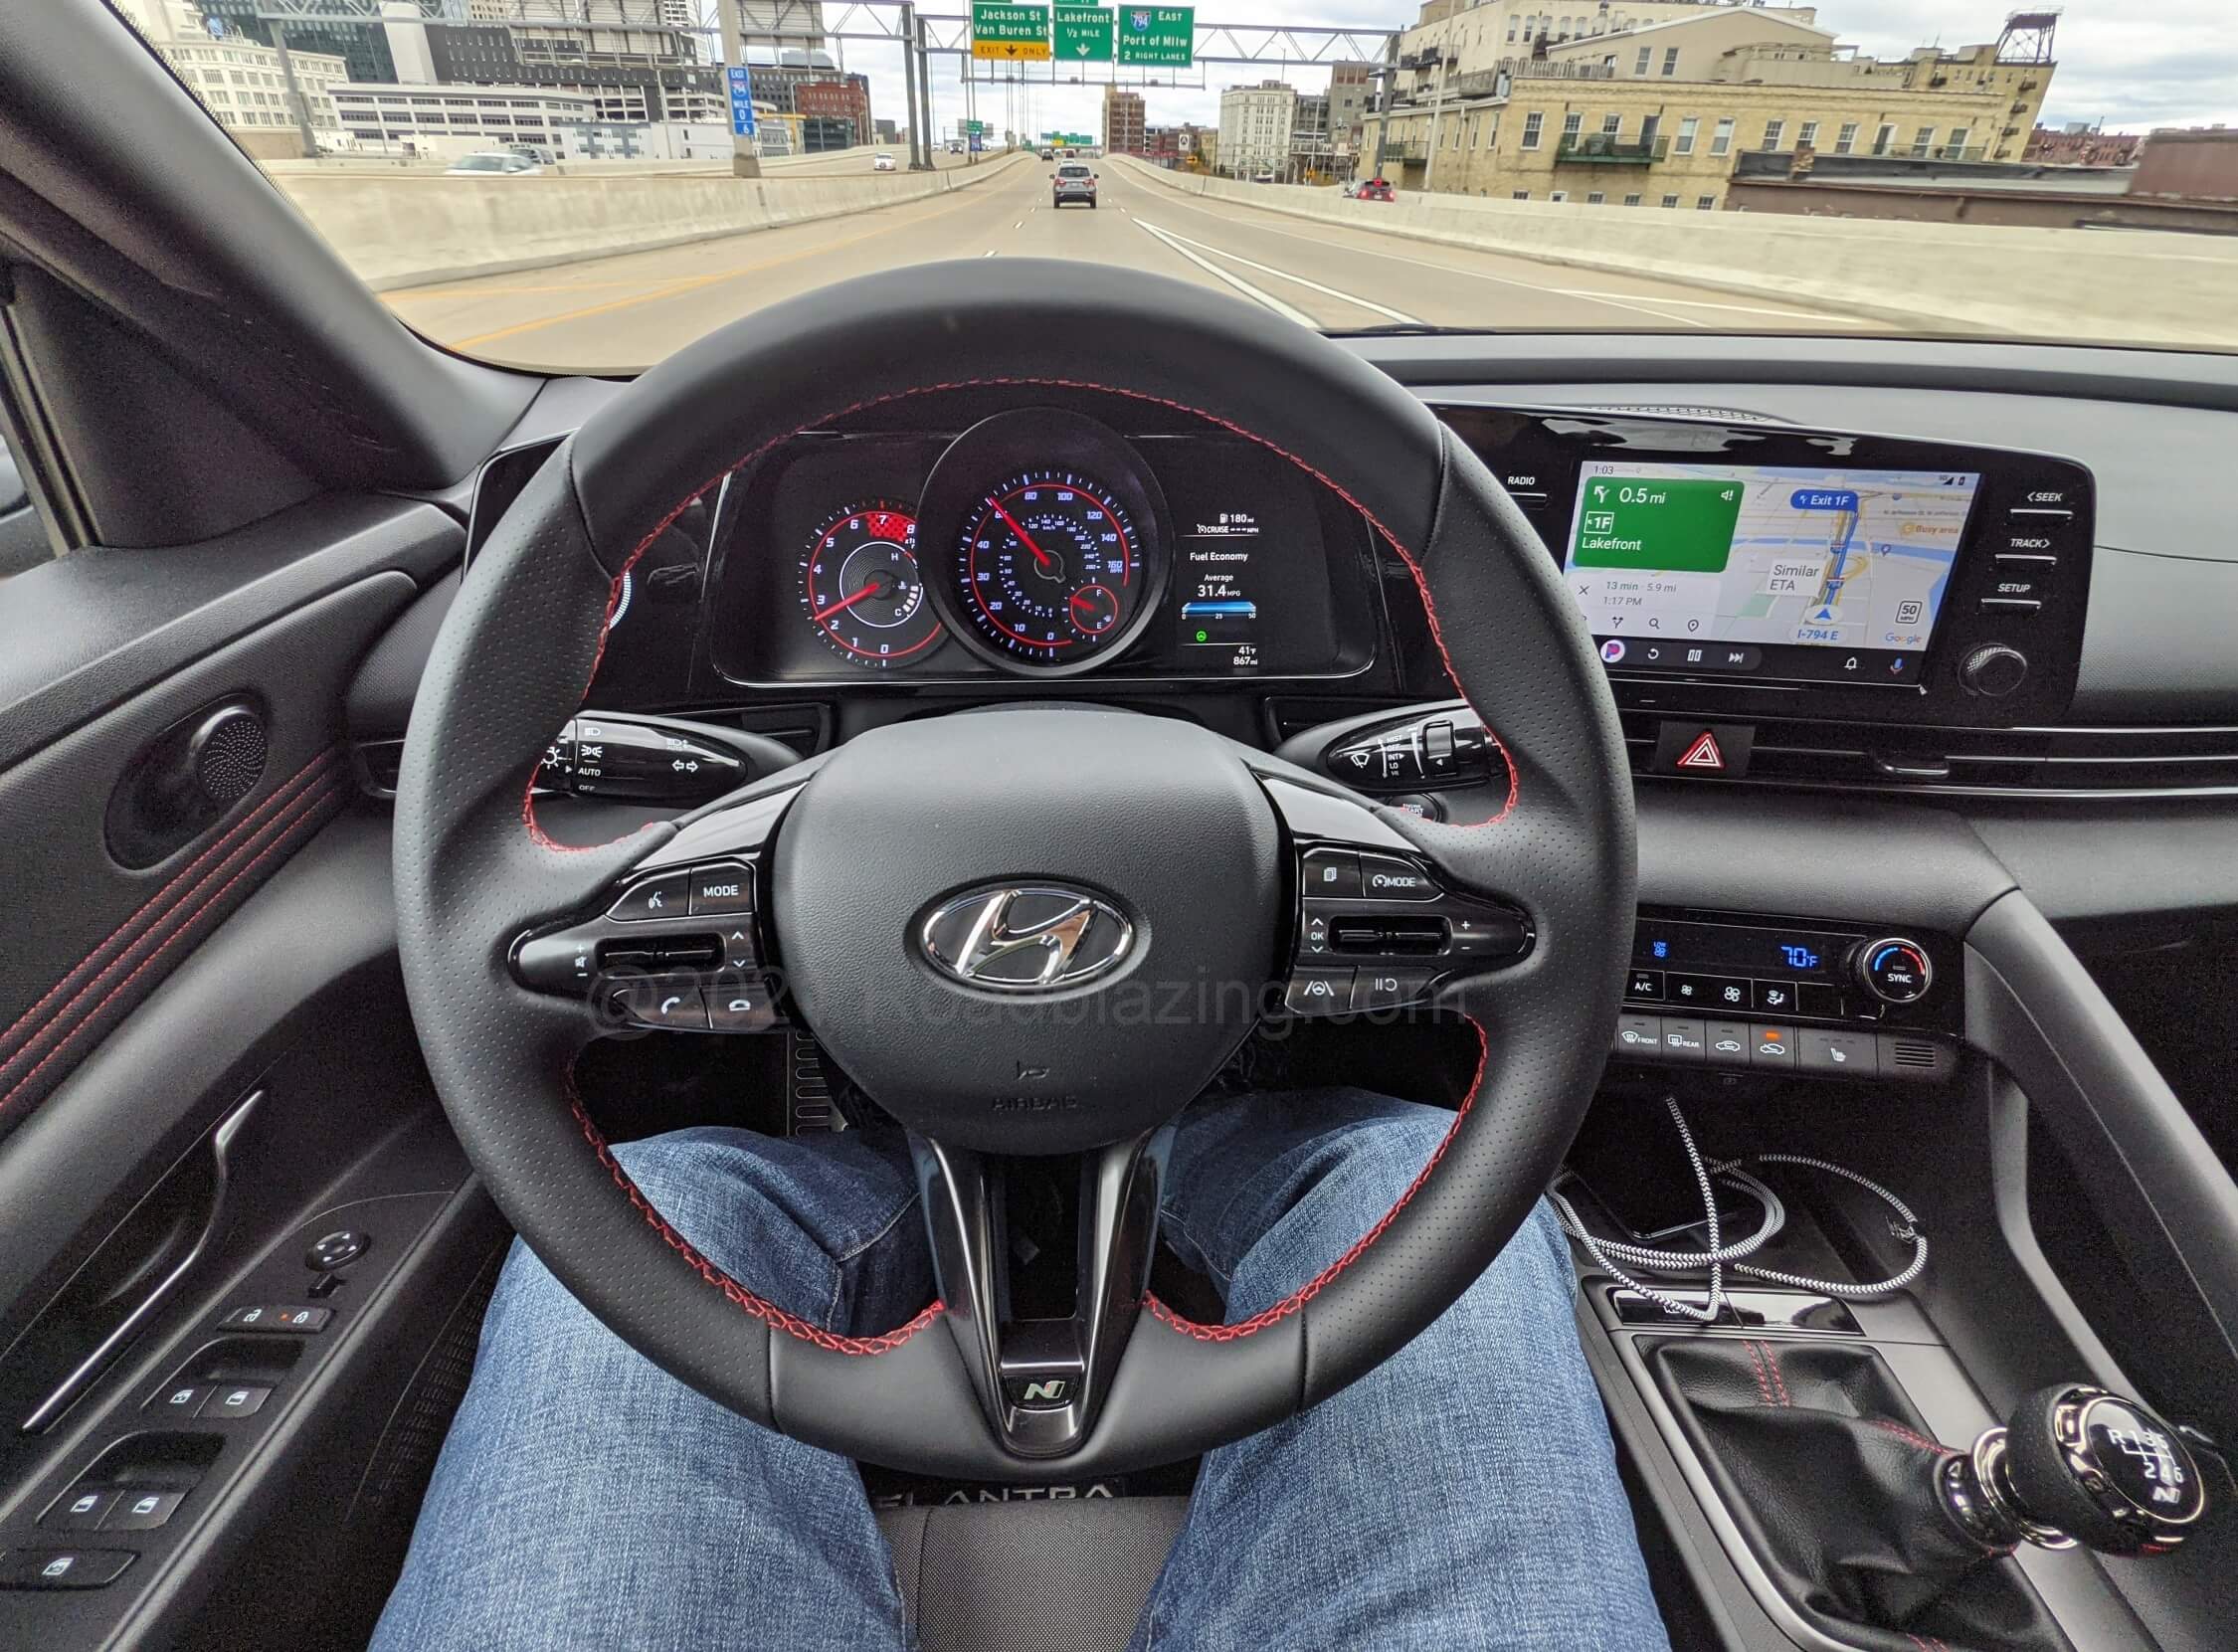 2021 Hyundai Elantra N-Line 1.6T: driving with Android Auto navigation